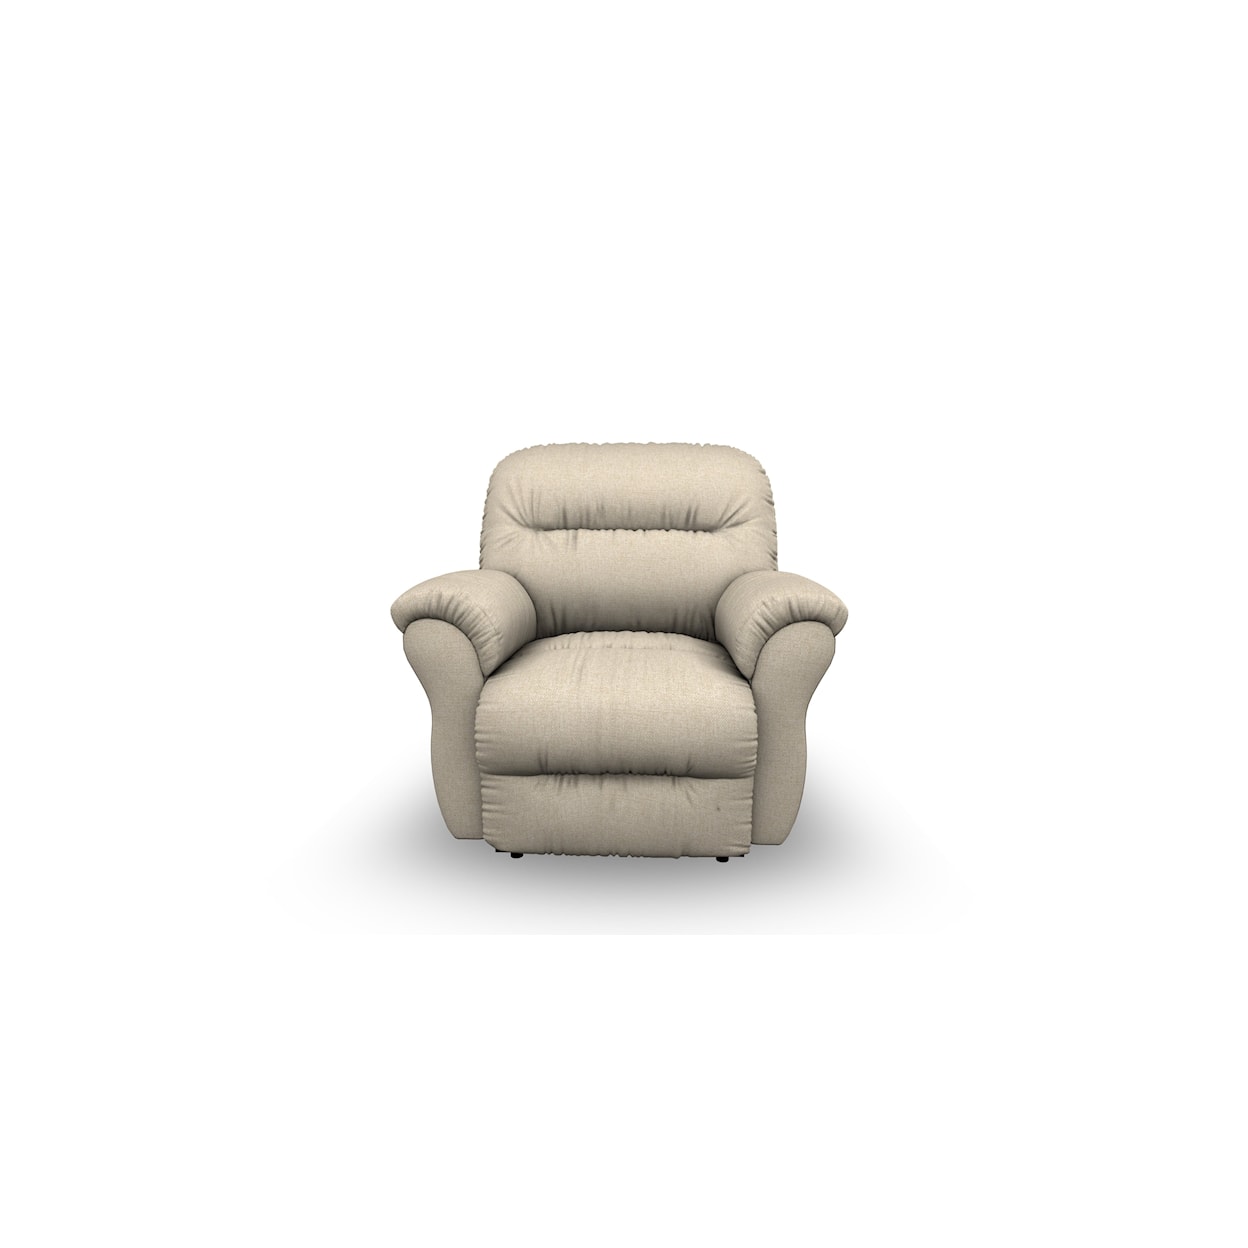 Best Home Furnishings Bodie Power Lift Recliner